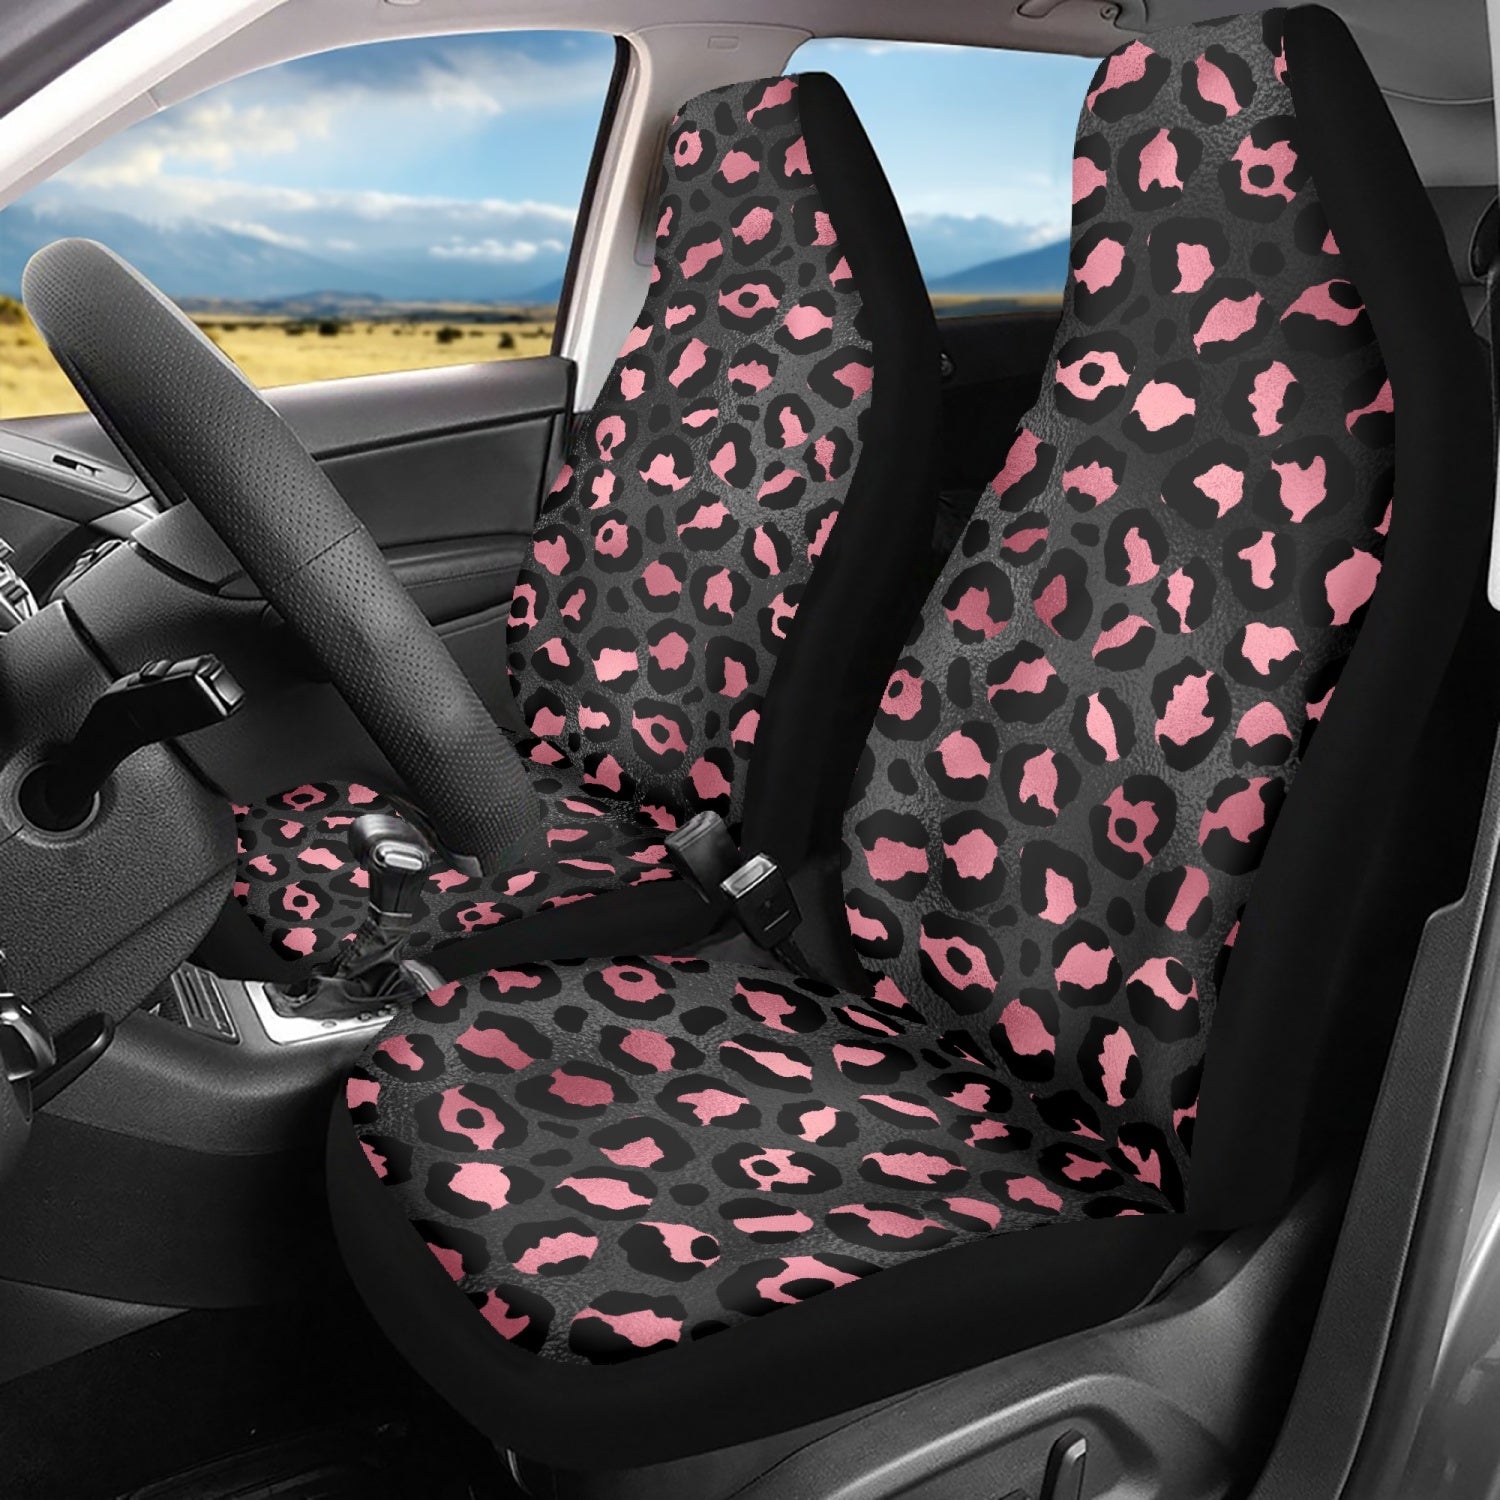 Pink and Gold Leopard Print Microfiber Car Seat Covers - 3Pcs